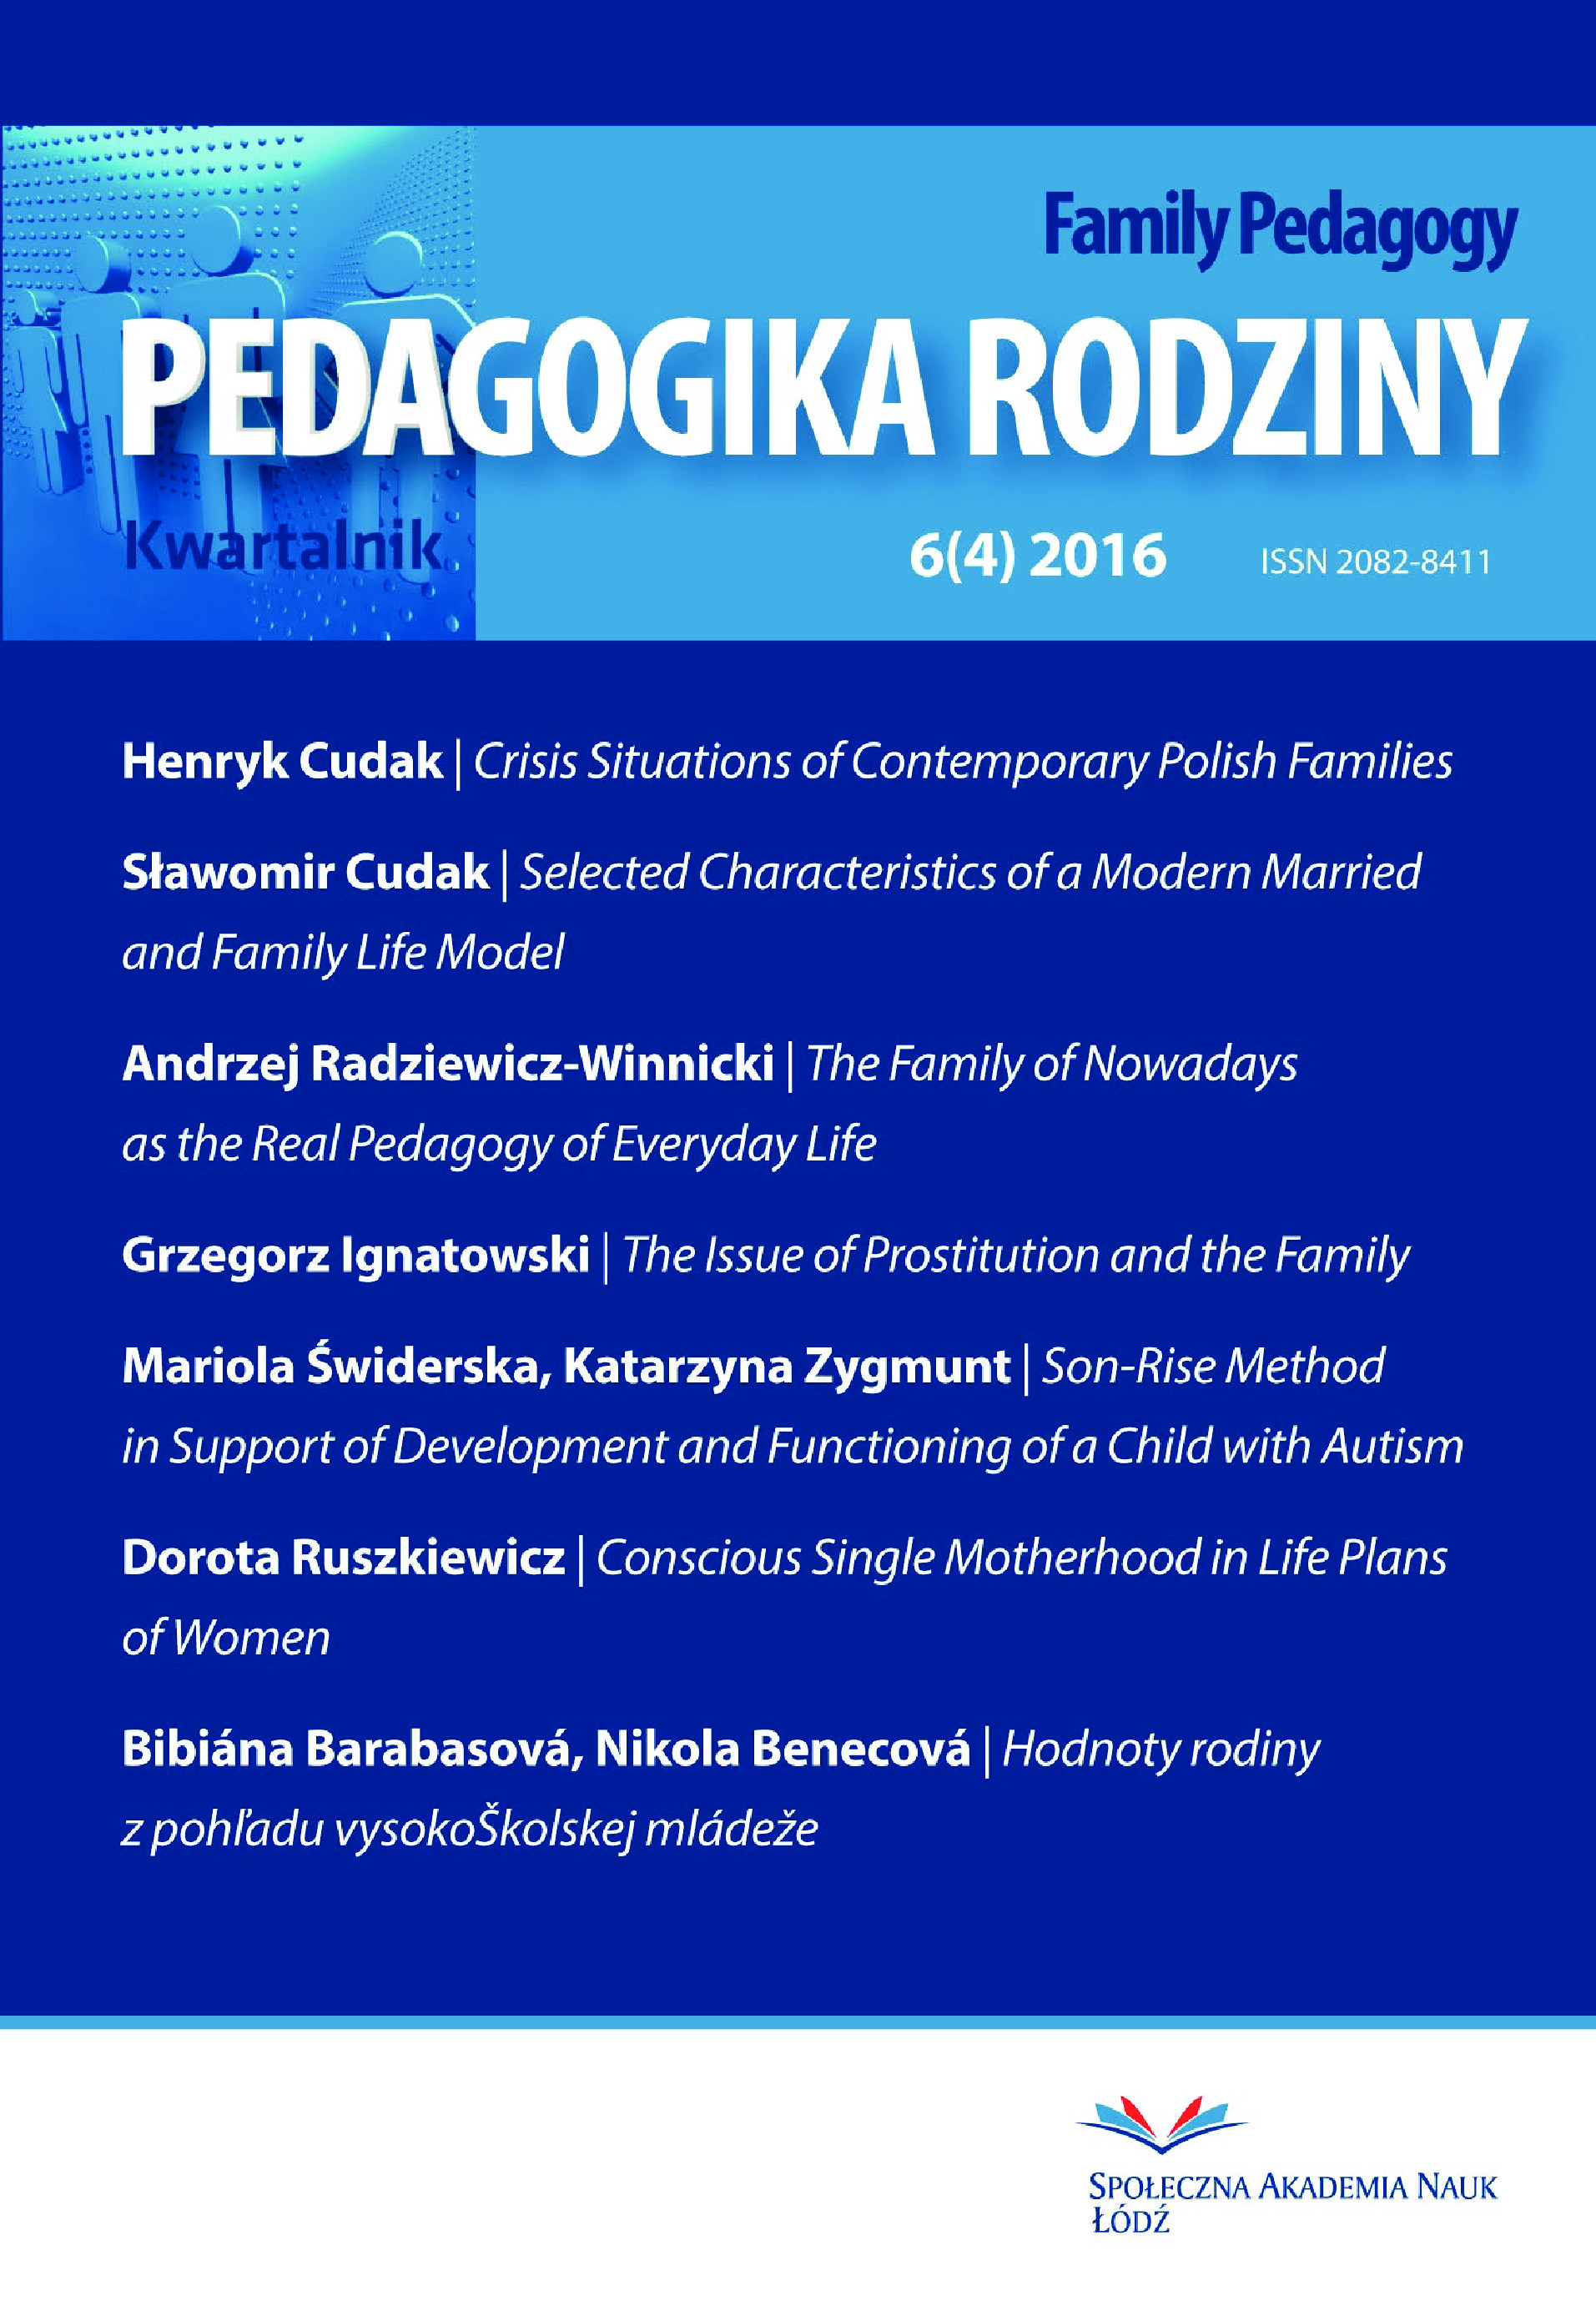 Activity of Social Associations which Support Musical Education for Children and Adolescents in the Ignacy Jan Paderewski 1st and 2nd Degree State Music School in Piotrków Trybunalski